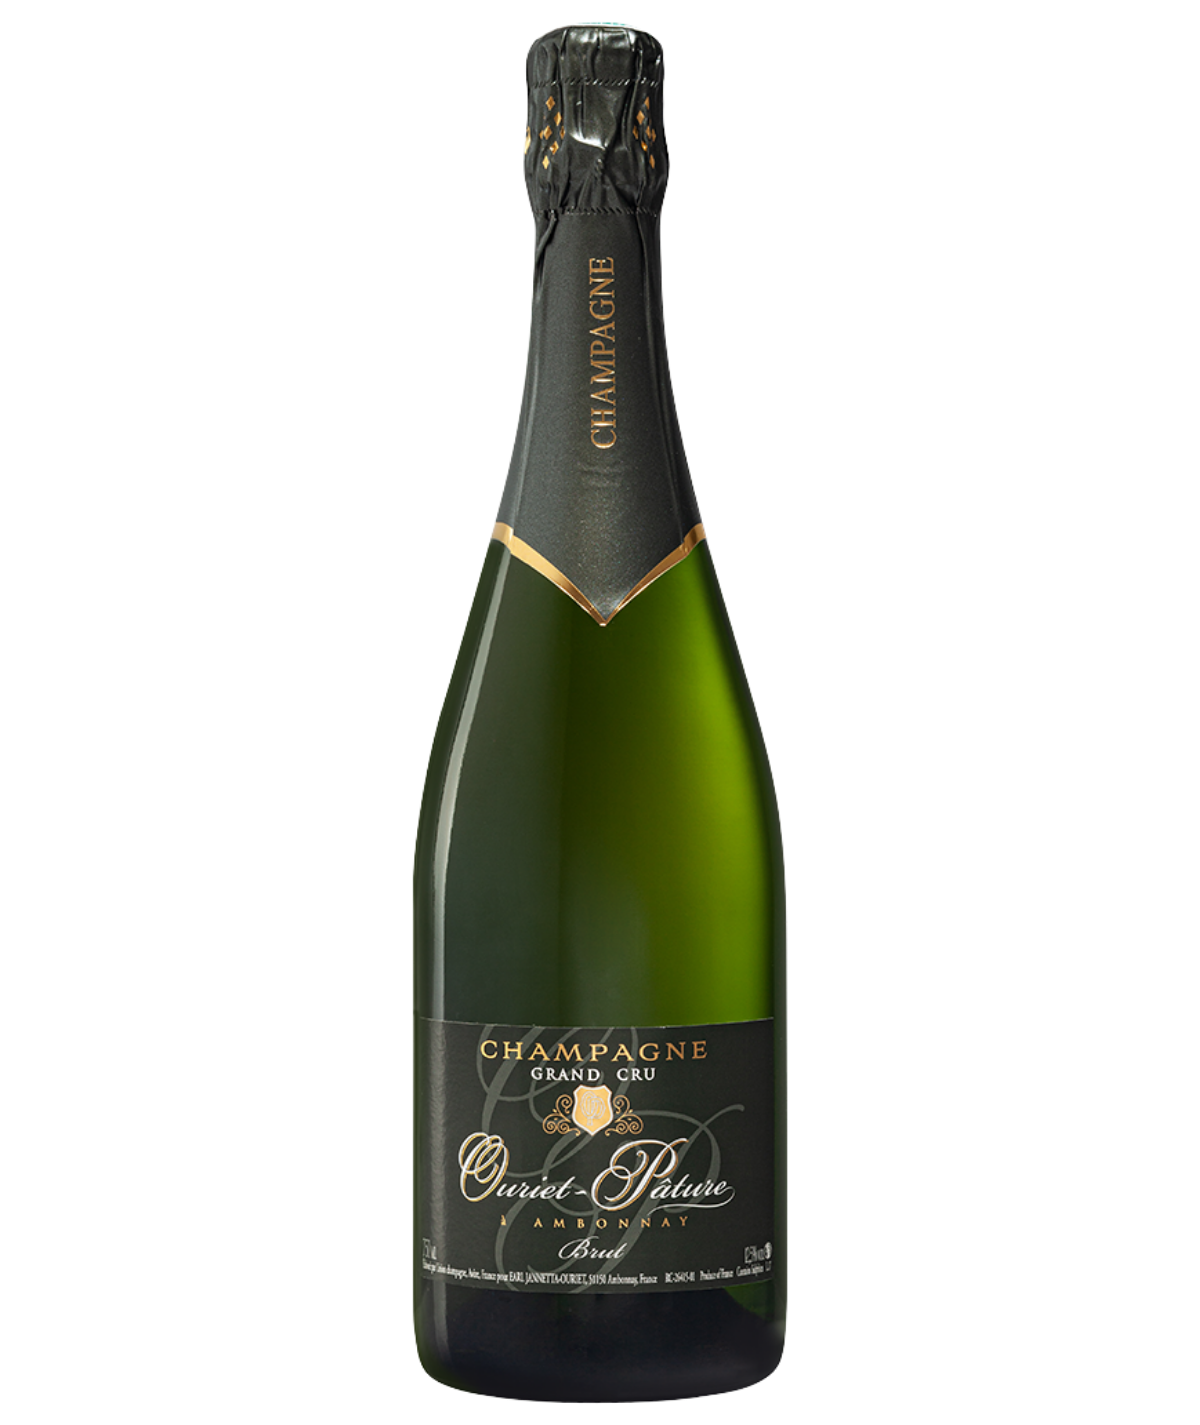 OURIET-PATURE Tradition Grand Cru Champagner